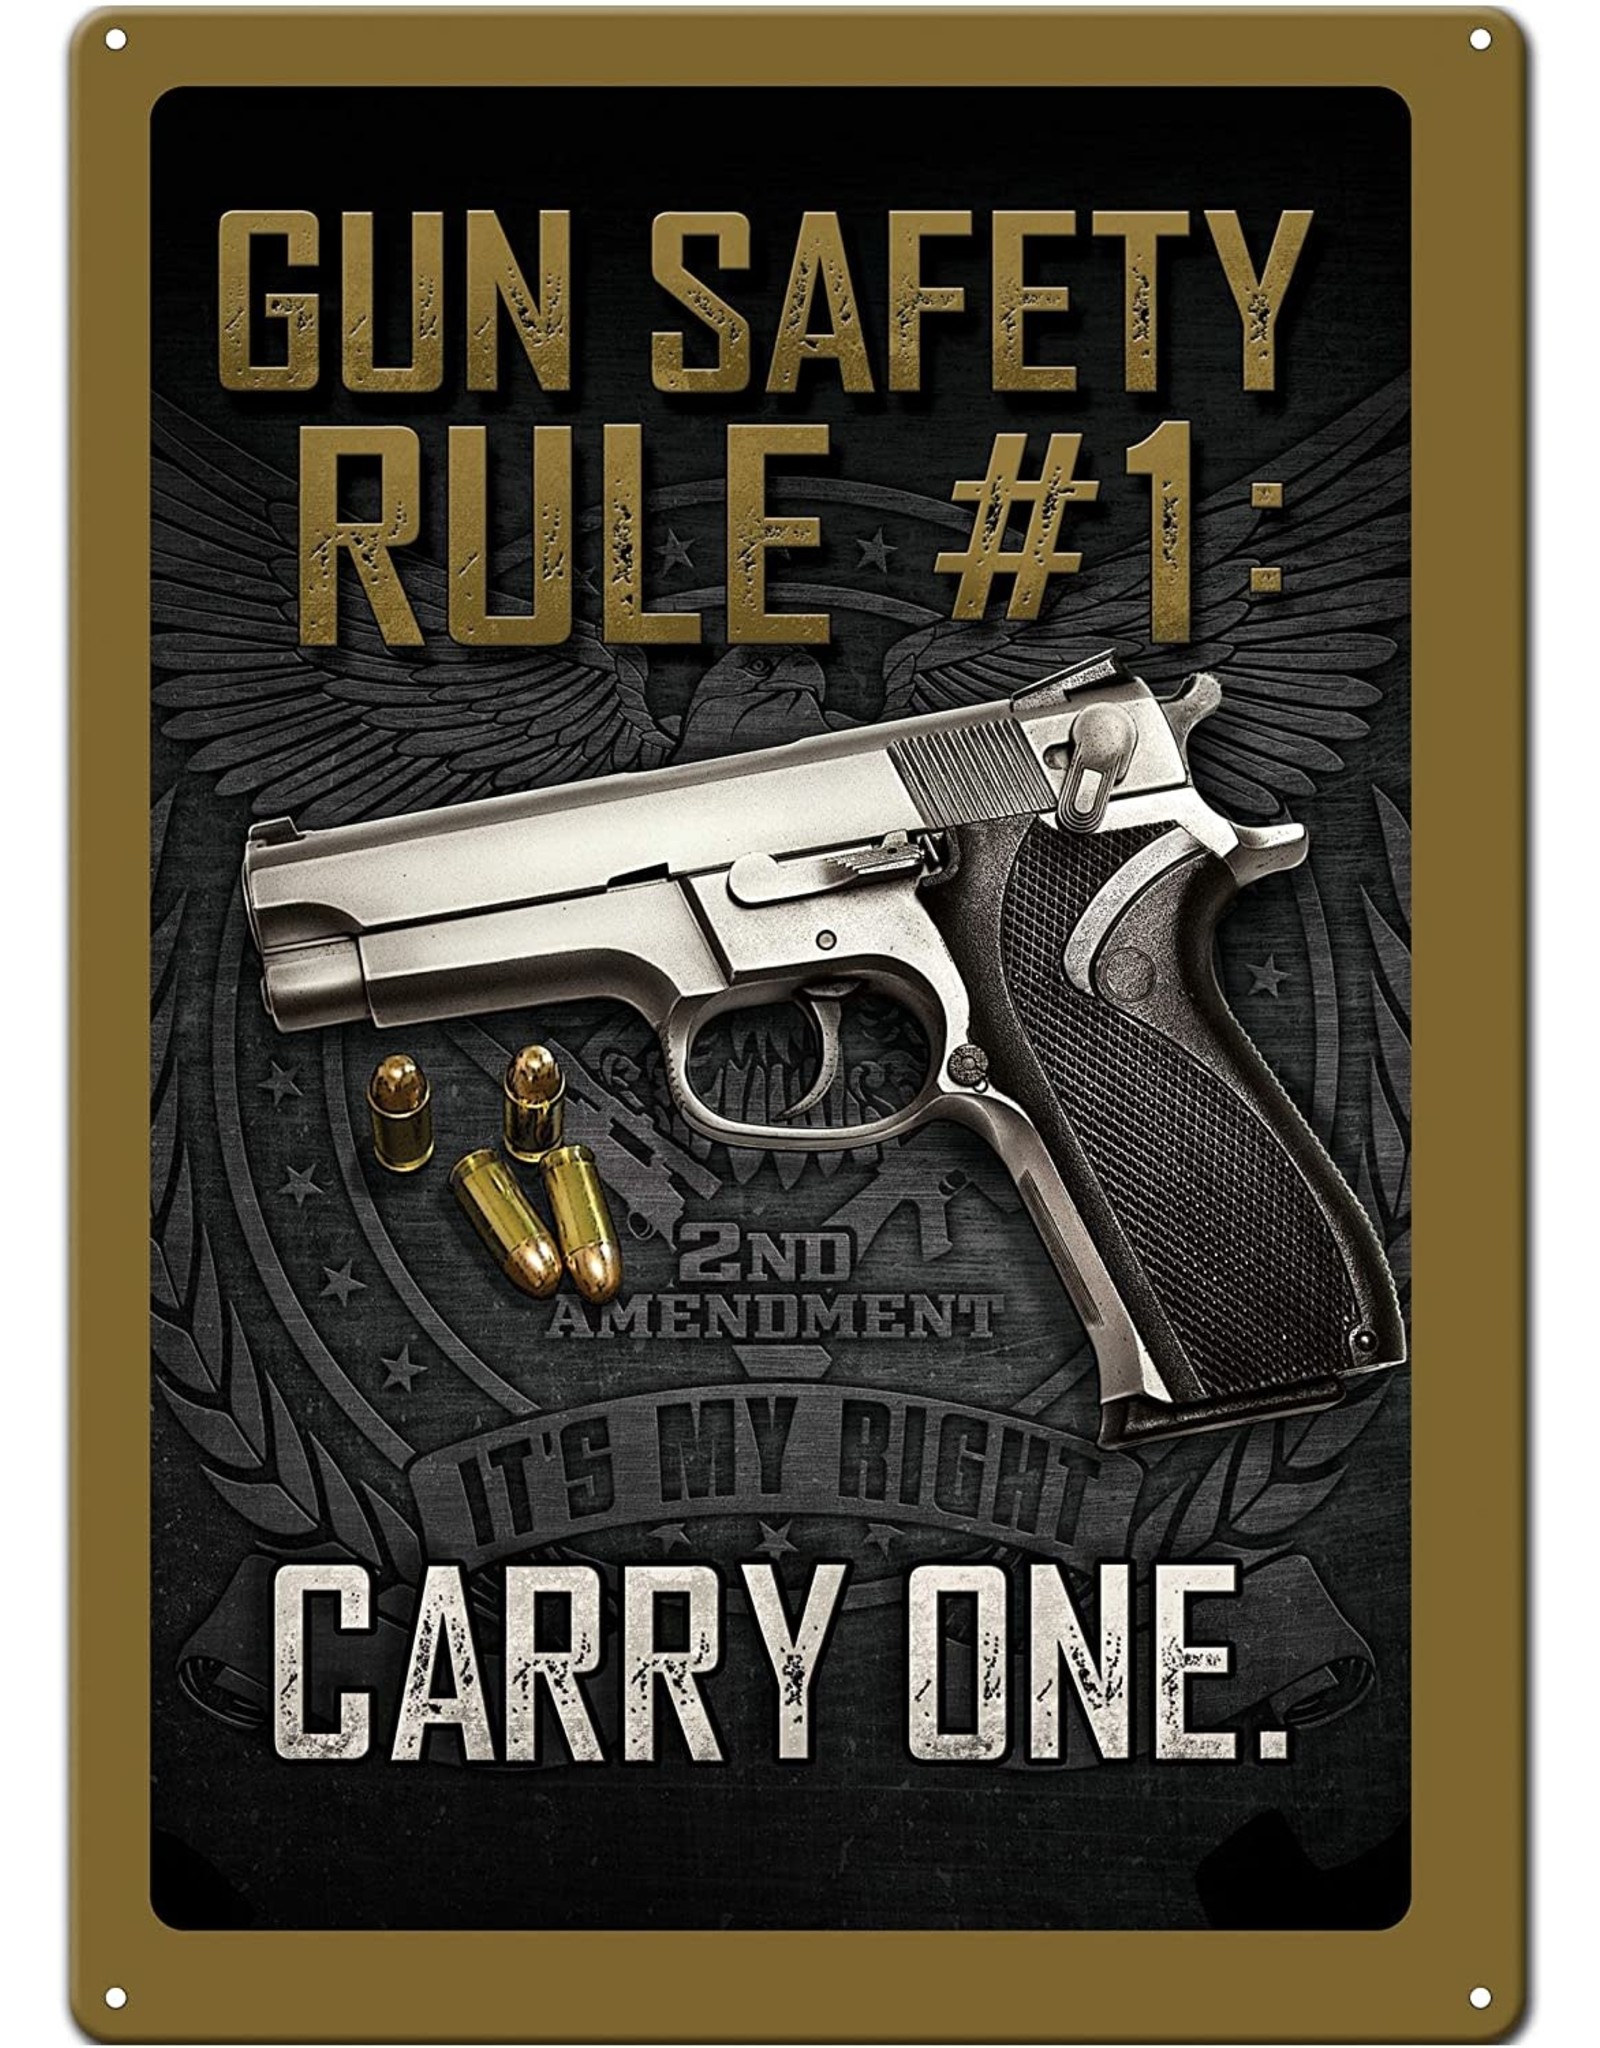 Rivers Edge Products Tin Sign 12in x 17in - Gun Safety